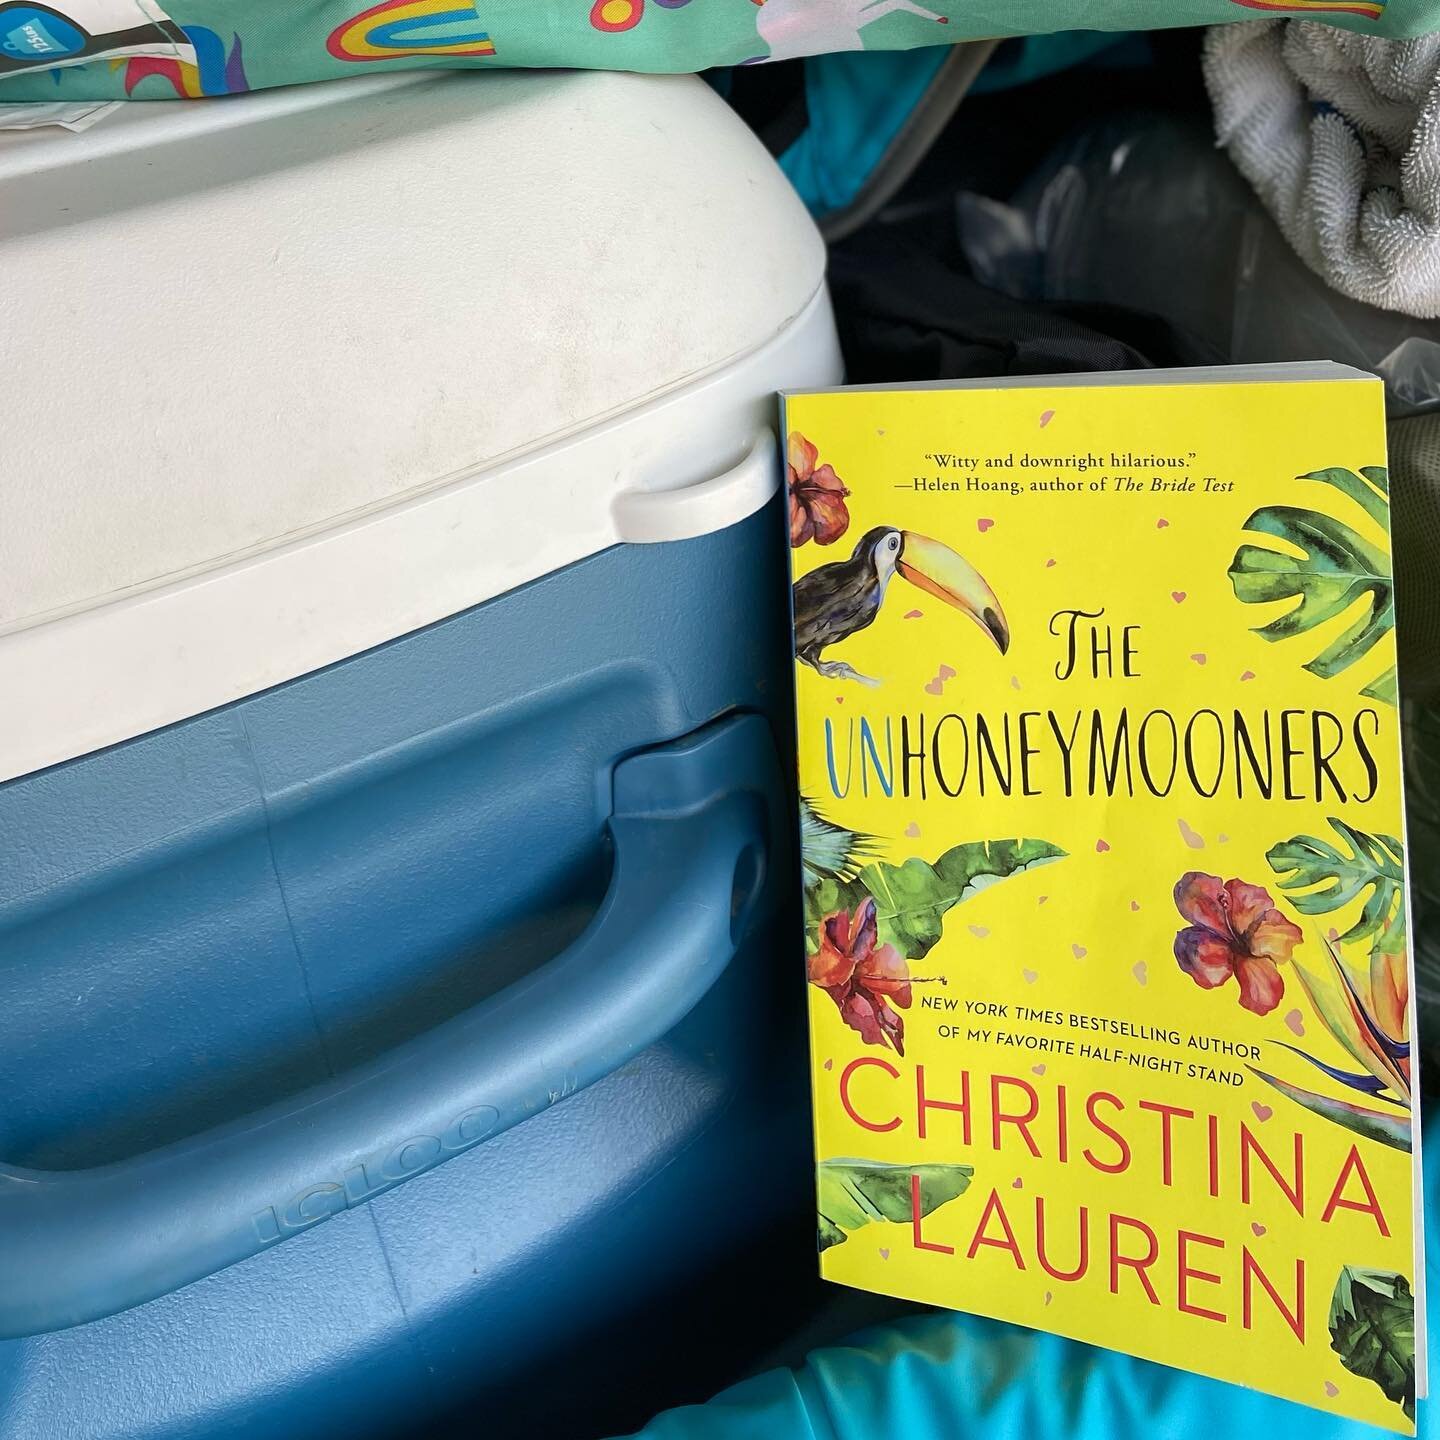 What&rsquo;s the most important item to pack when camping...your current read!

Right now that&rsquo;s THE UNHONEYMOONERS by @christinalauren  If you like the fake husband, enemies-to-lovers trope, this adorable book is for you. I'm on the last few c